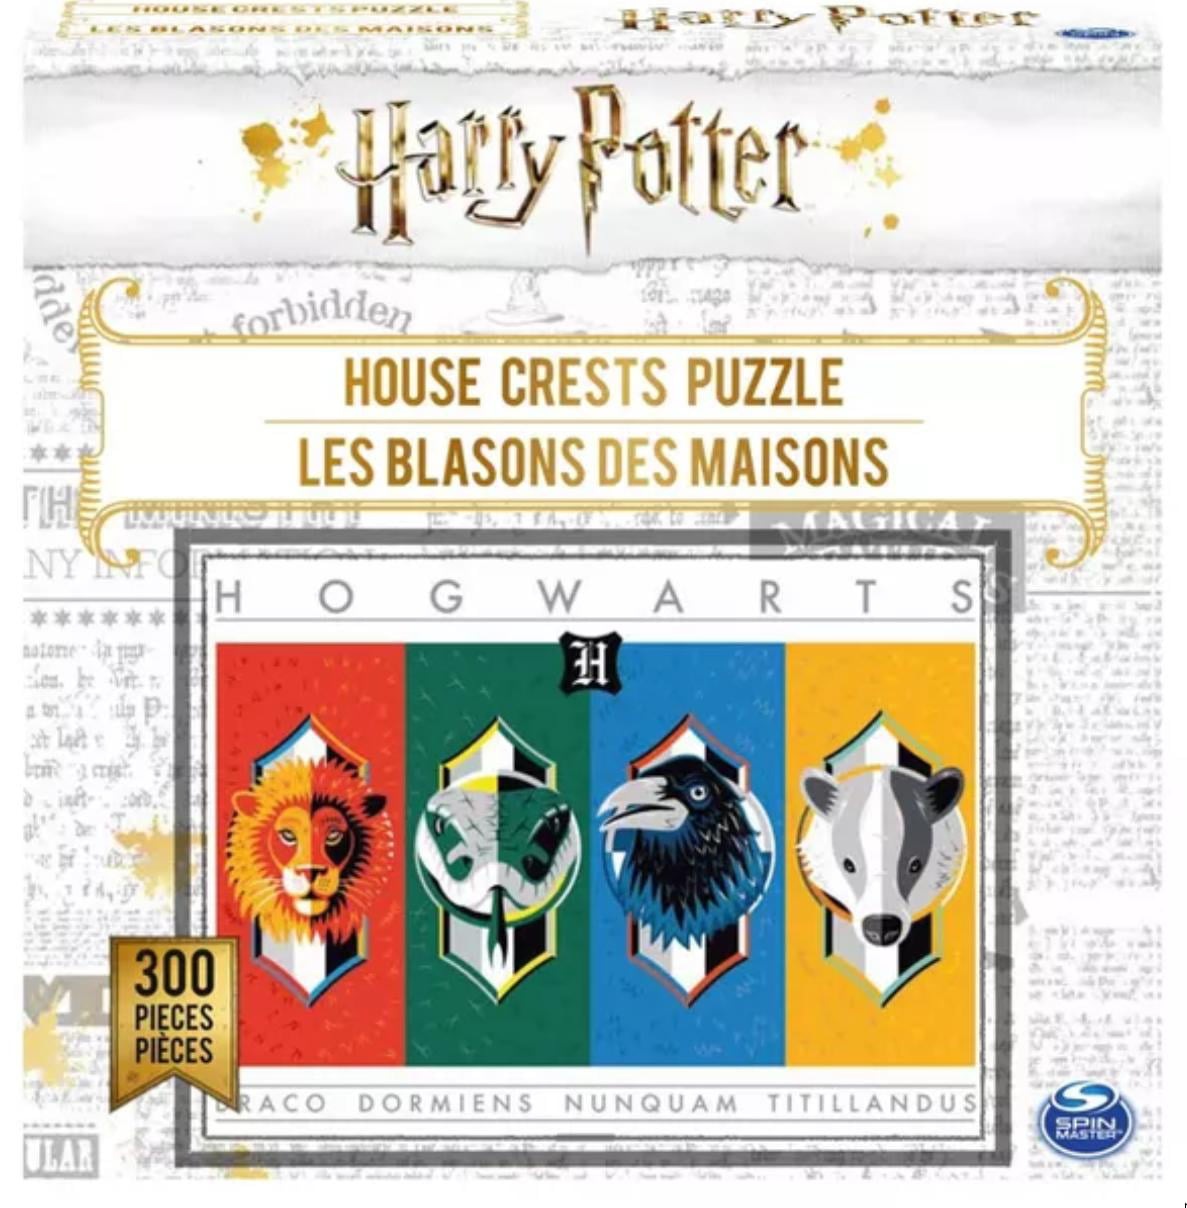 Harry Potter Secret Horcrux 300 Piece Jigsaw Puzzle New Game for 2020 New